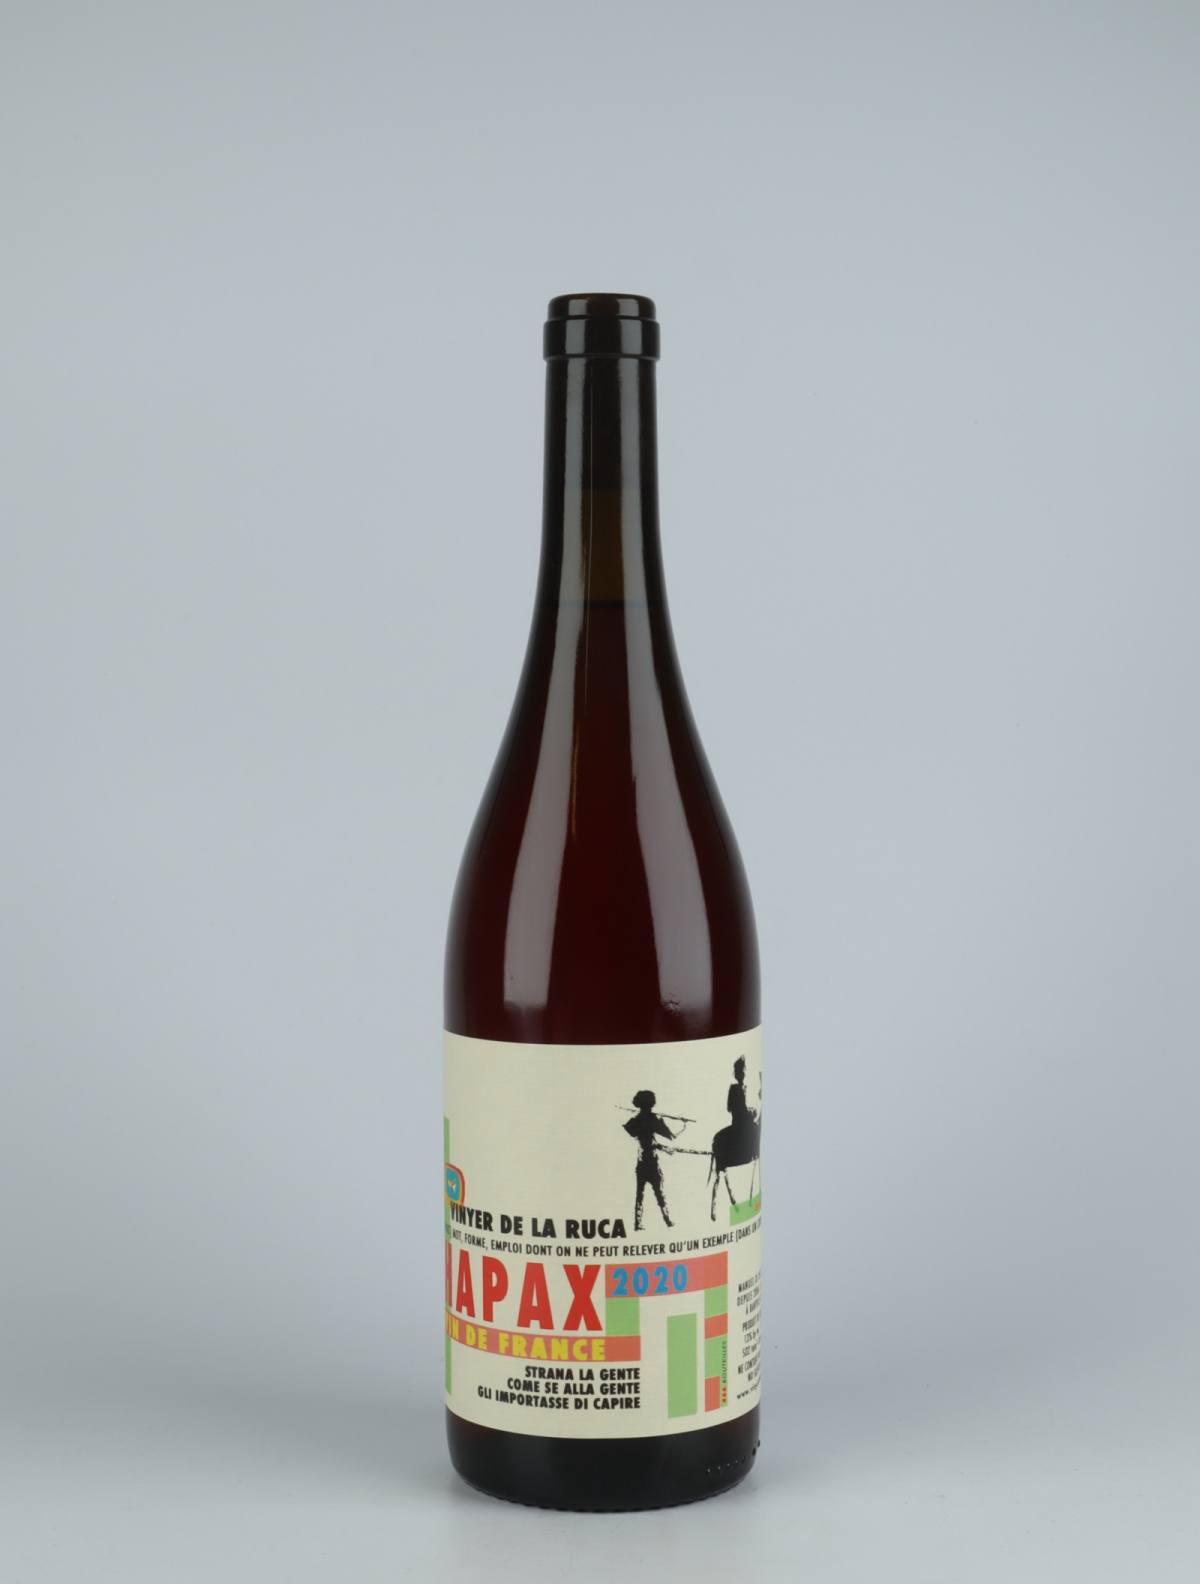 A bottle 2020 Hapax Rosé from , Rousillon in France